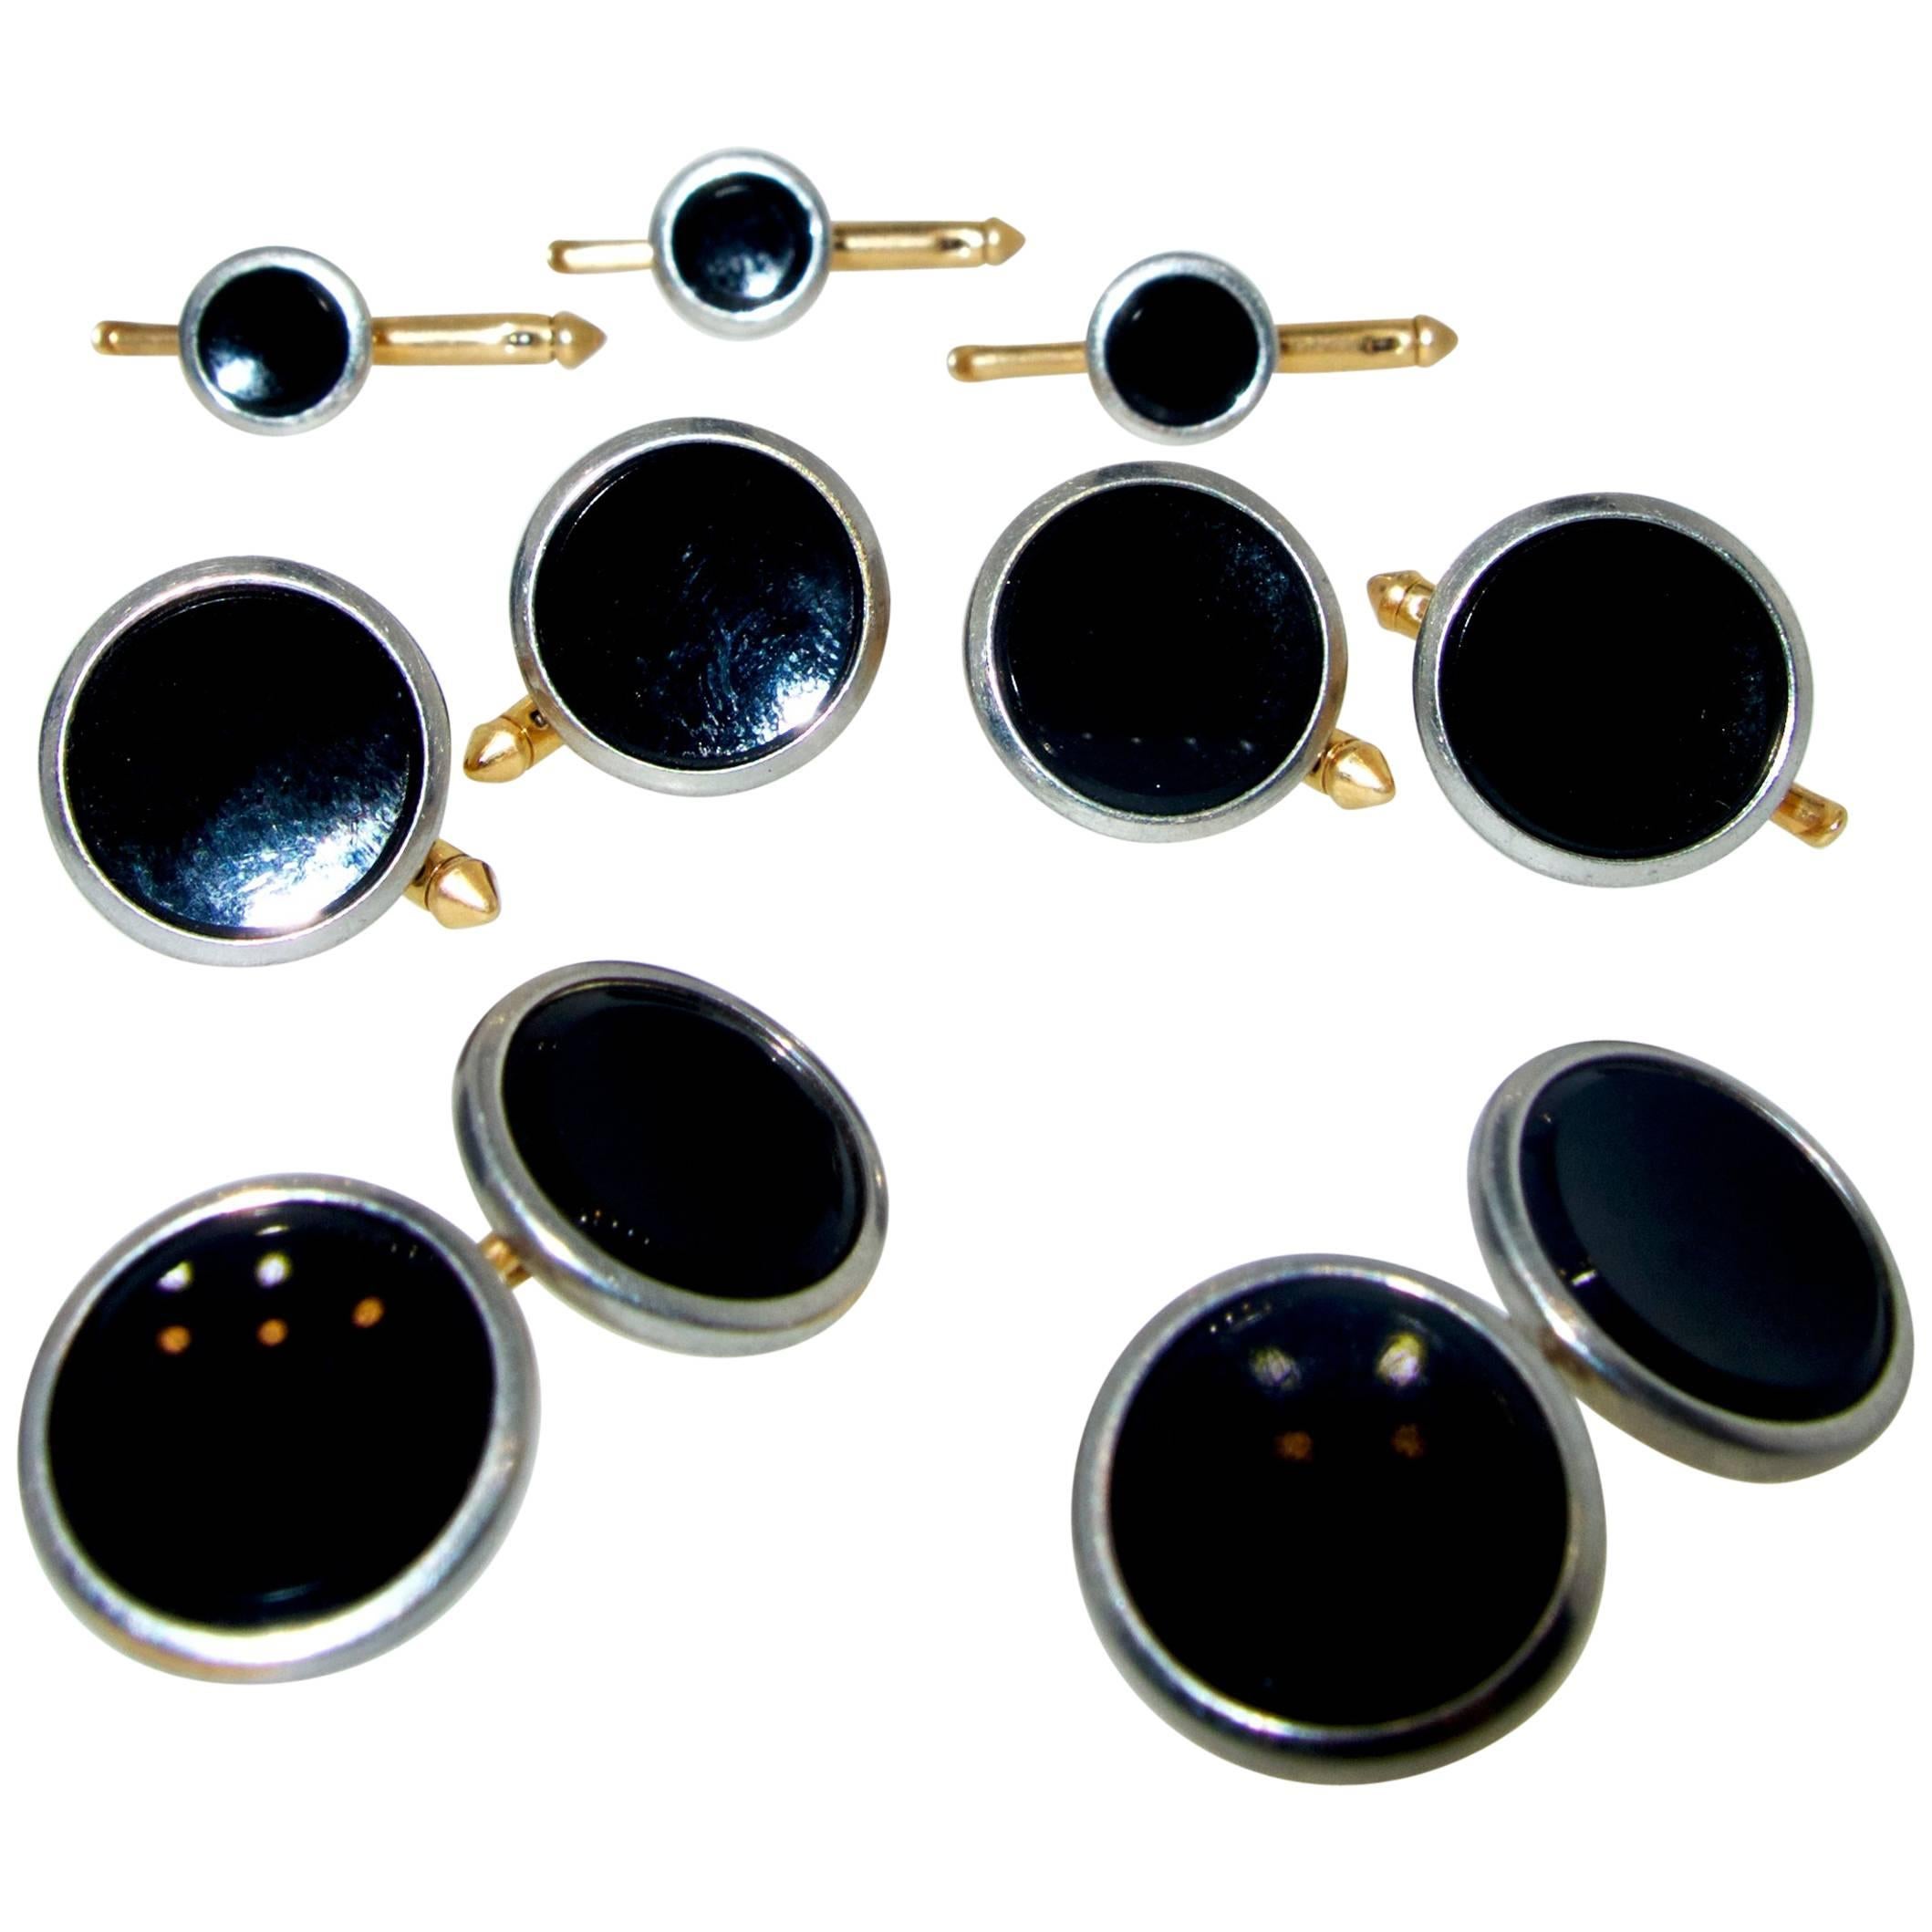  Gentleman's Full Dress Set with Onyx and Gold, circa 1935